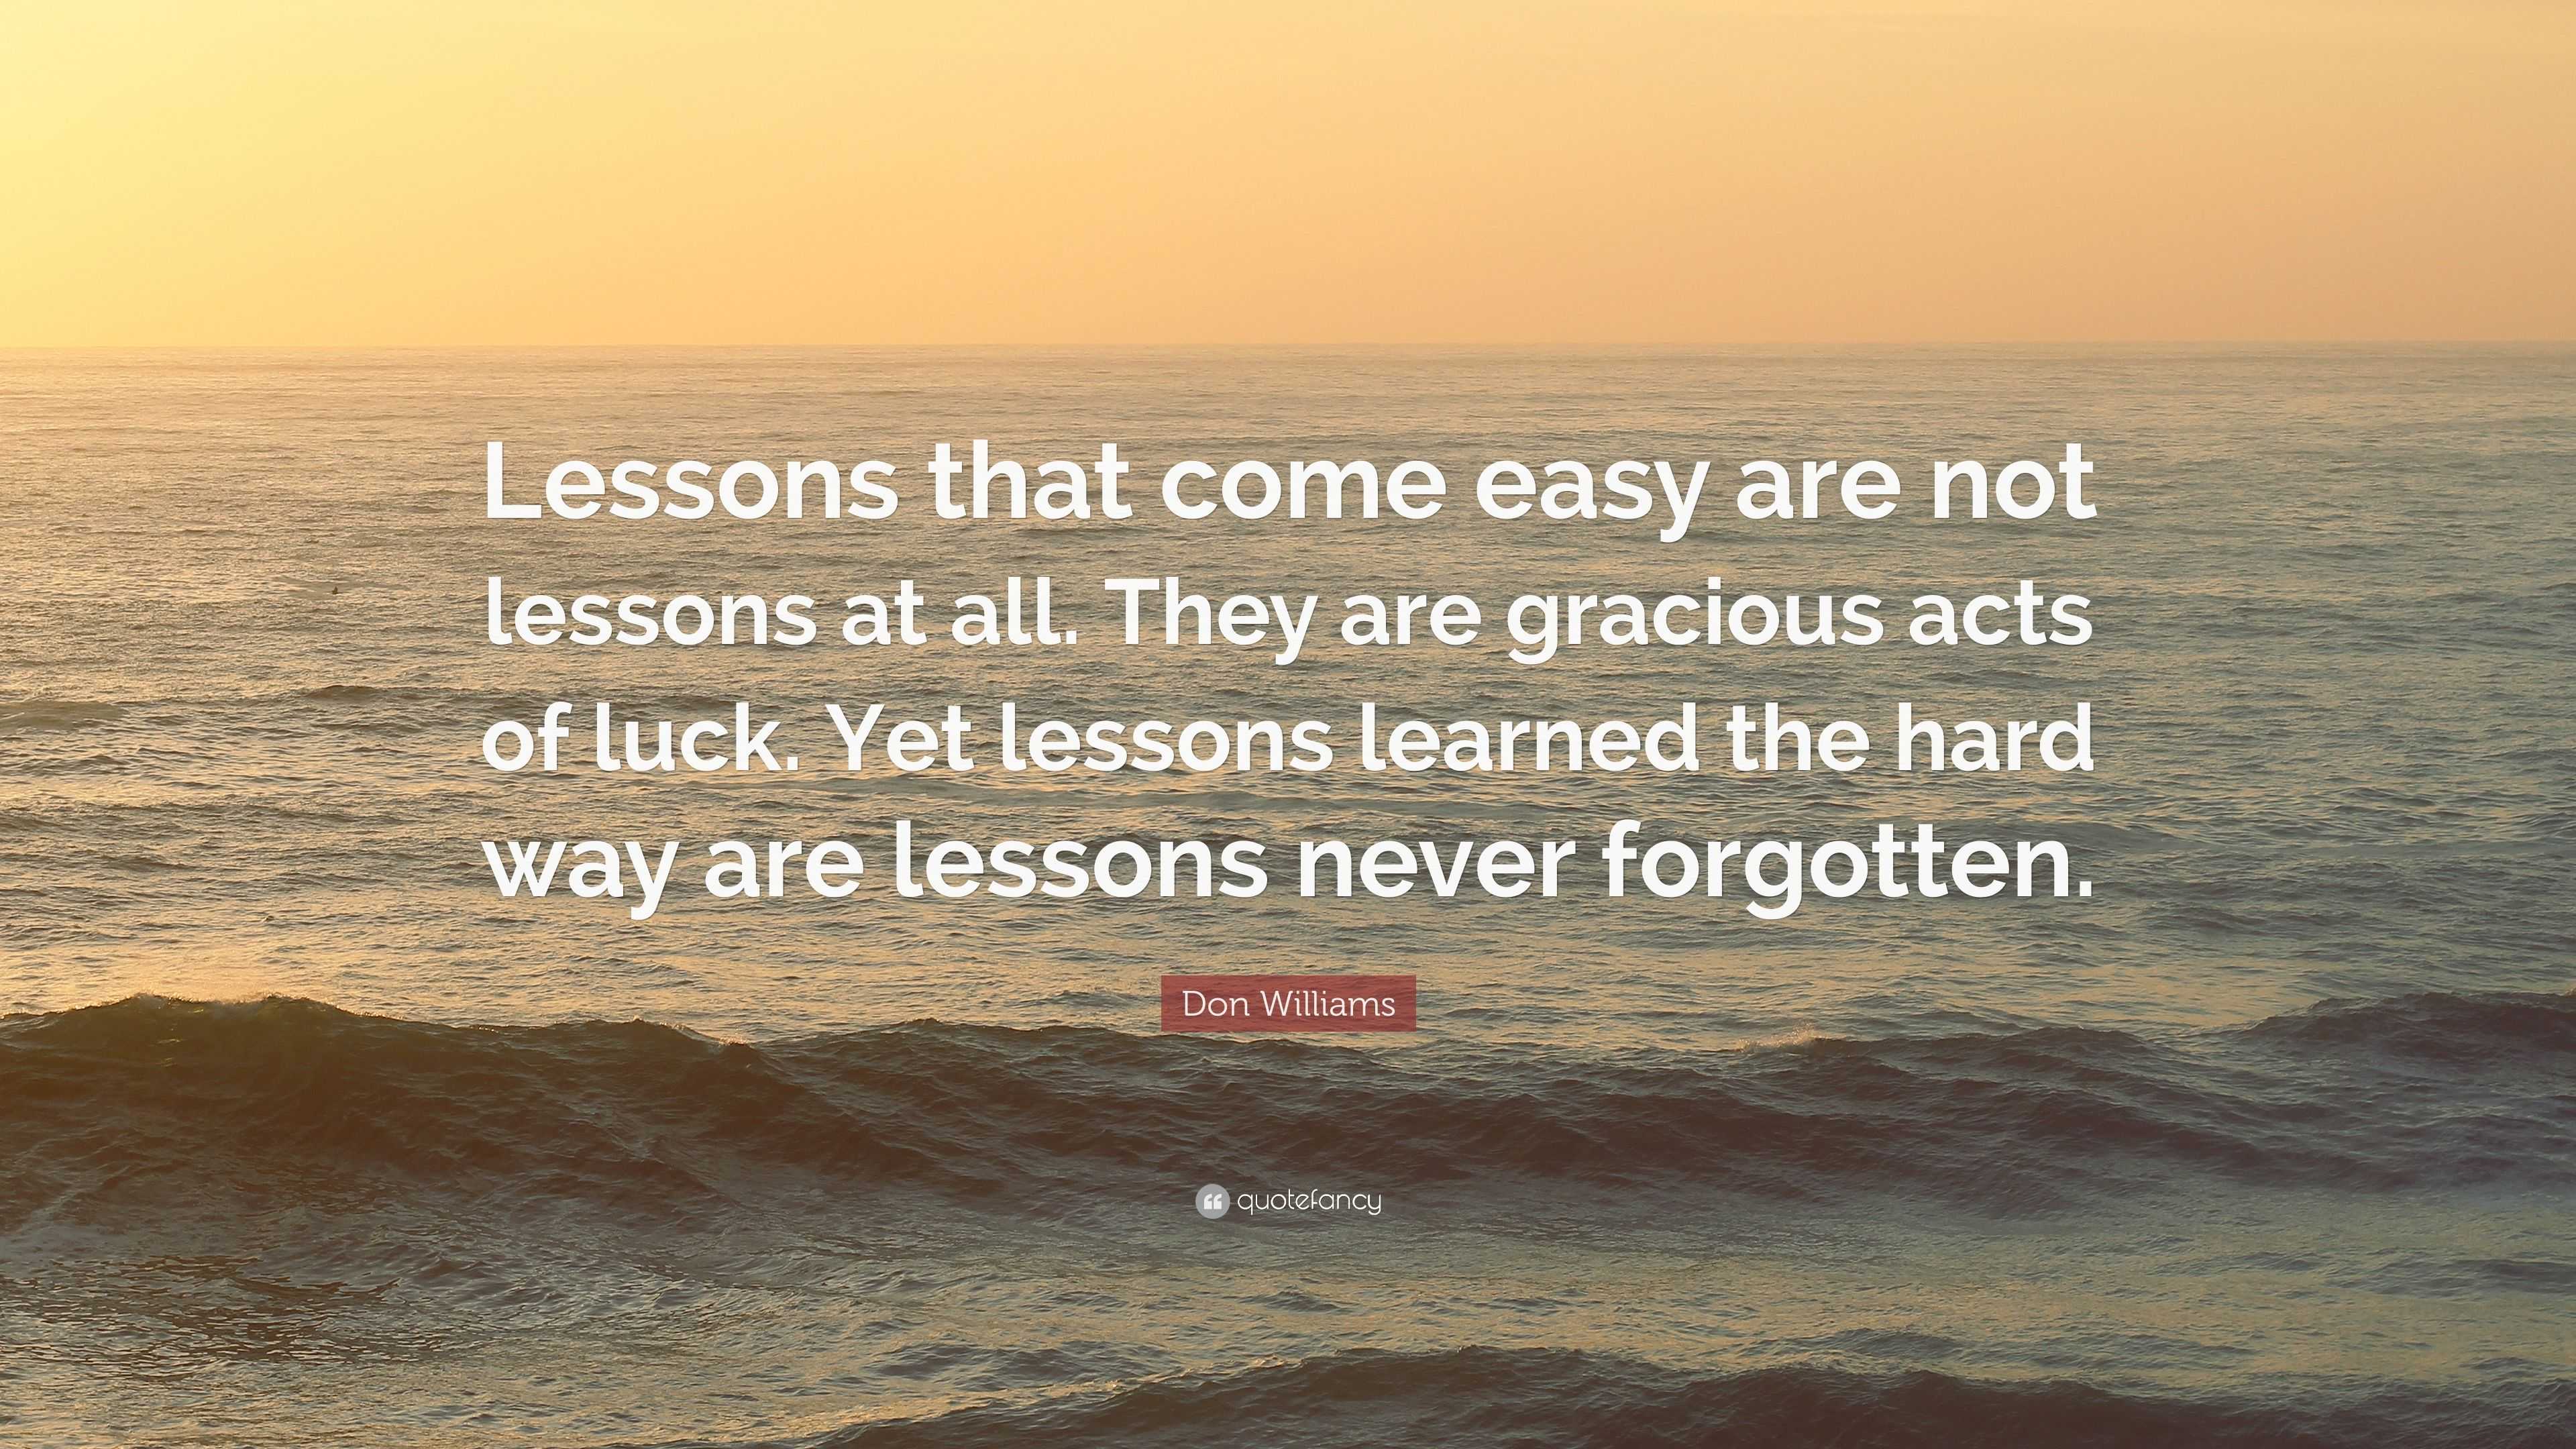 17 life lessons that are learned the hard way - Upworthy